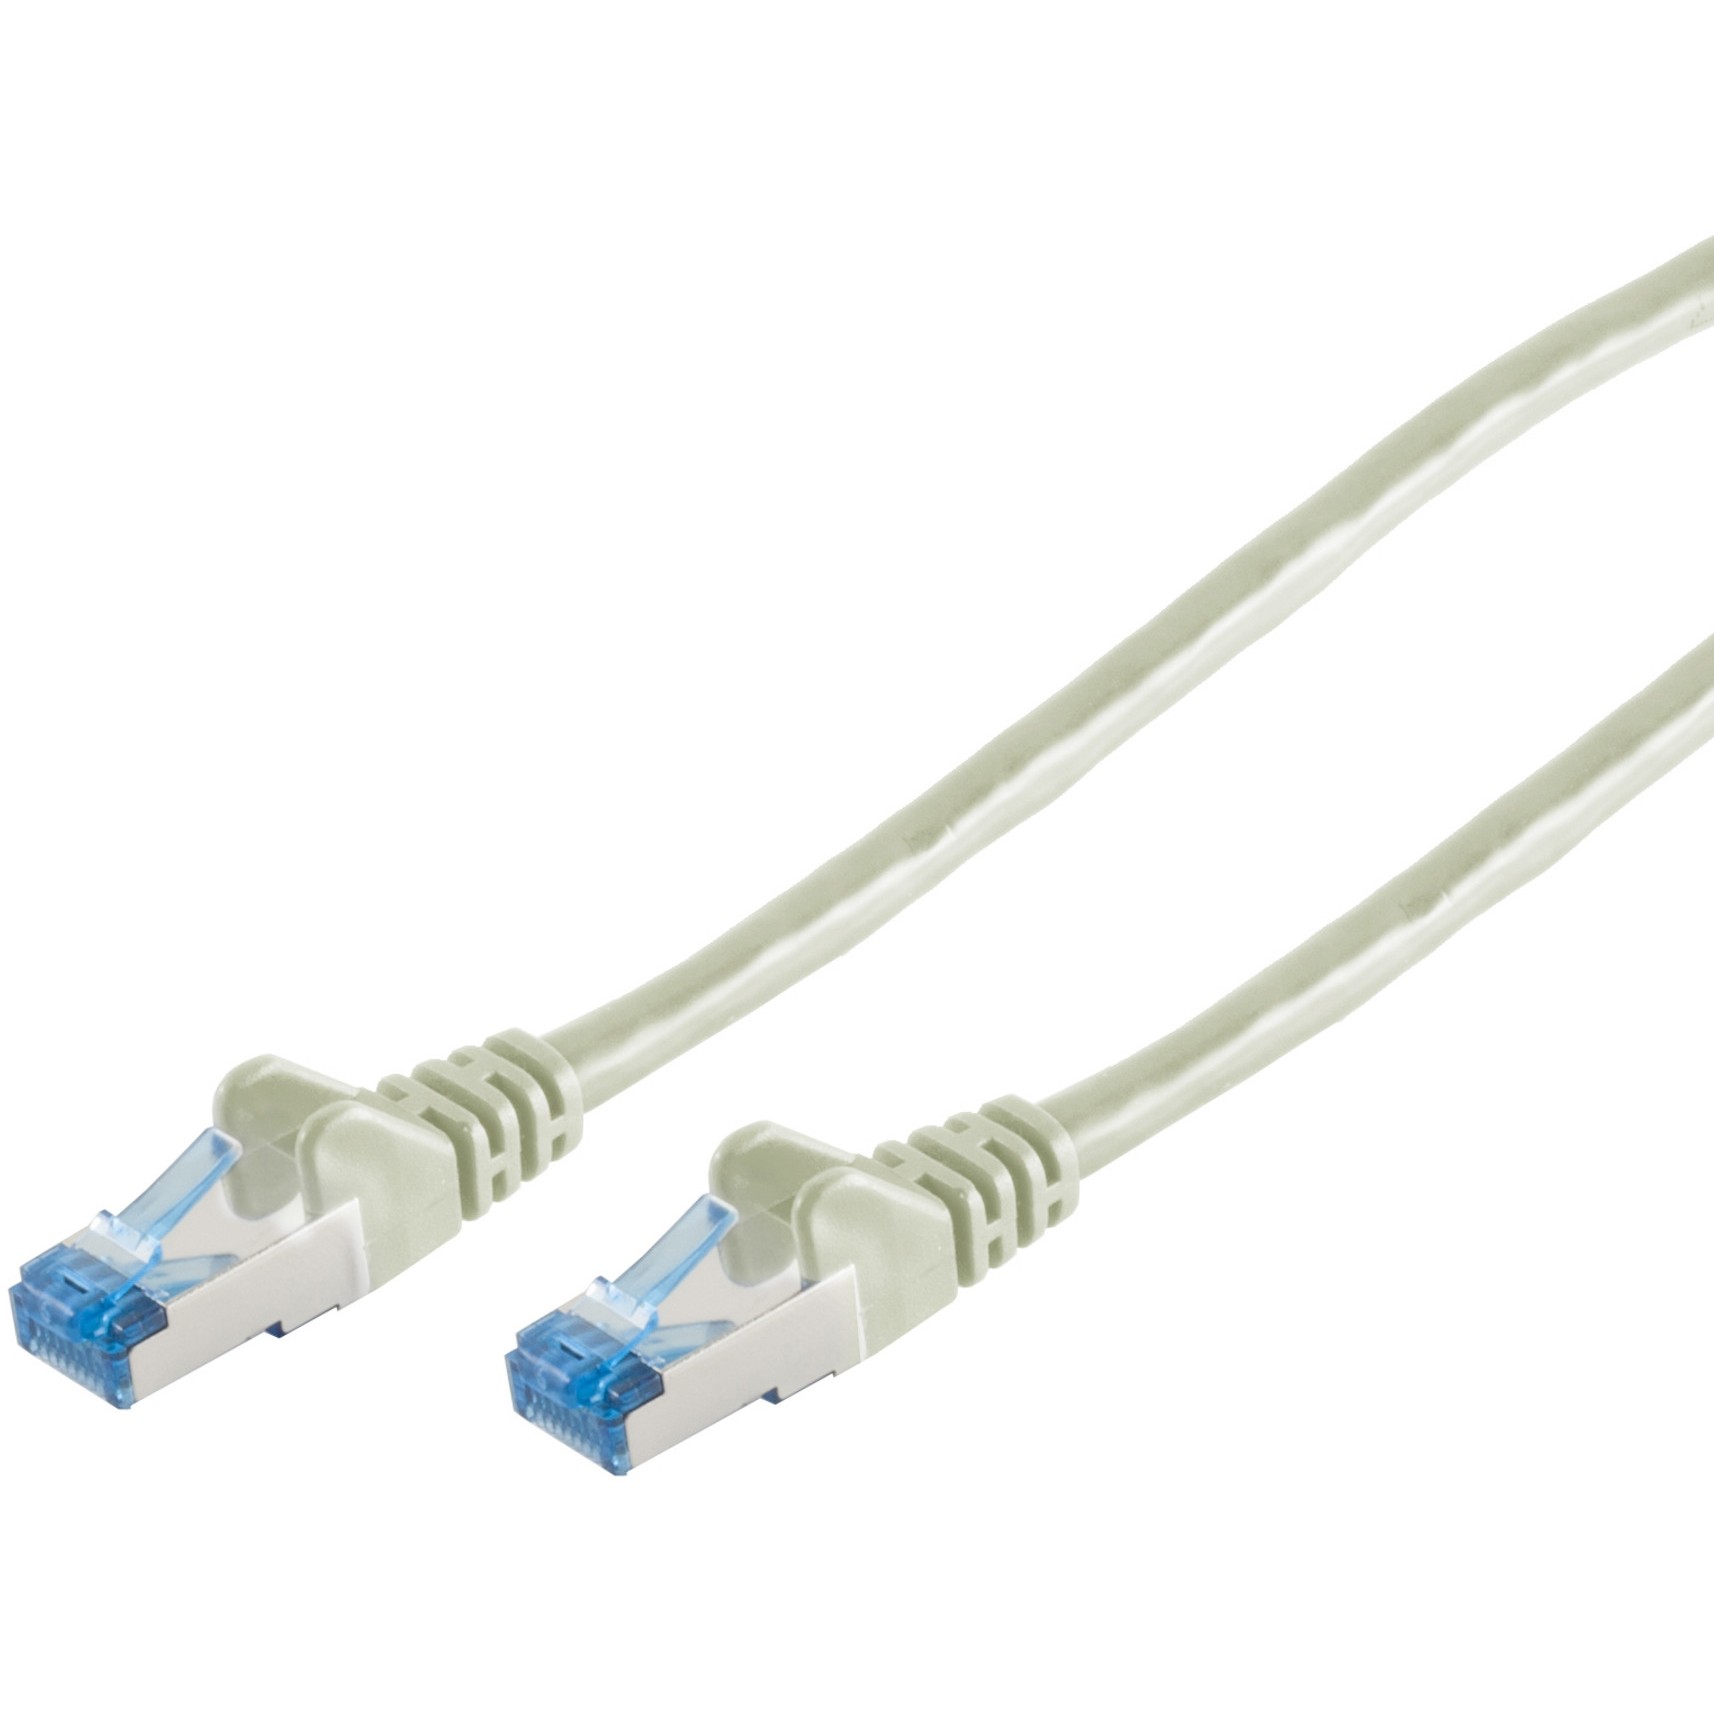 S-Conn 75717 networking cable - 75717